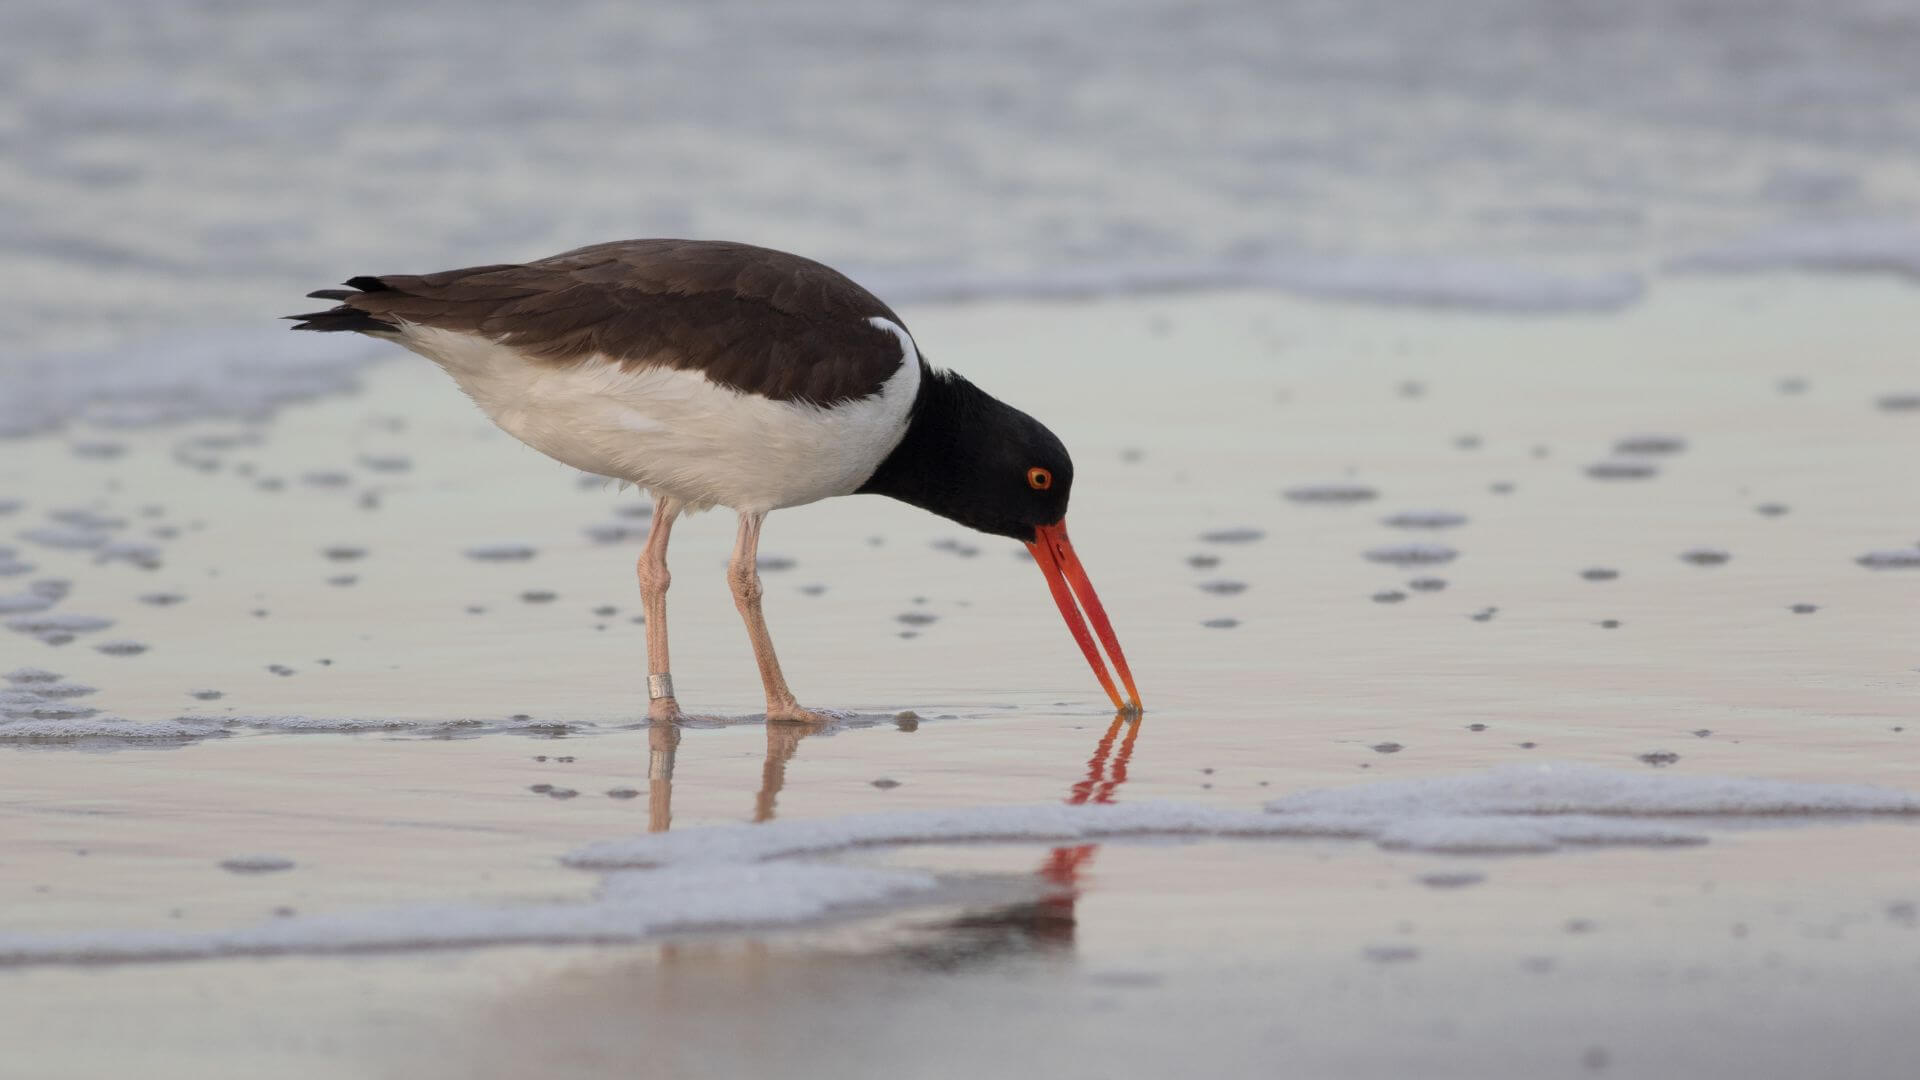 An American Oystercatcher digging for oysters on a beach in Cape May NJ